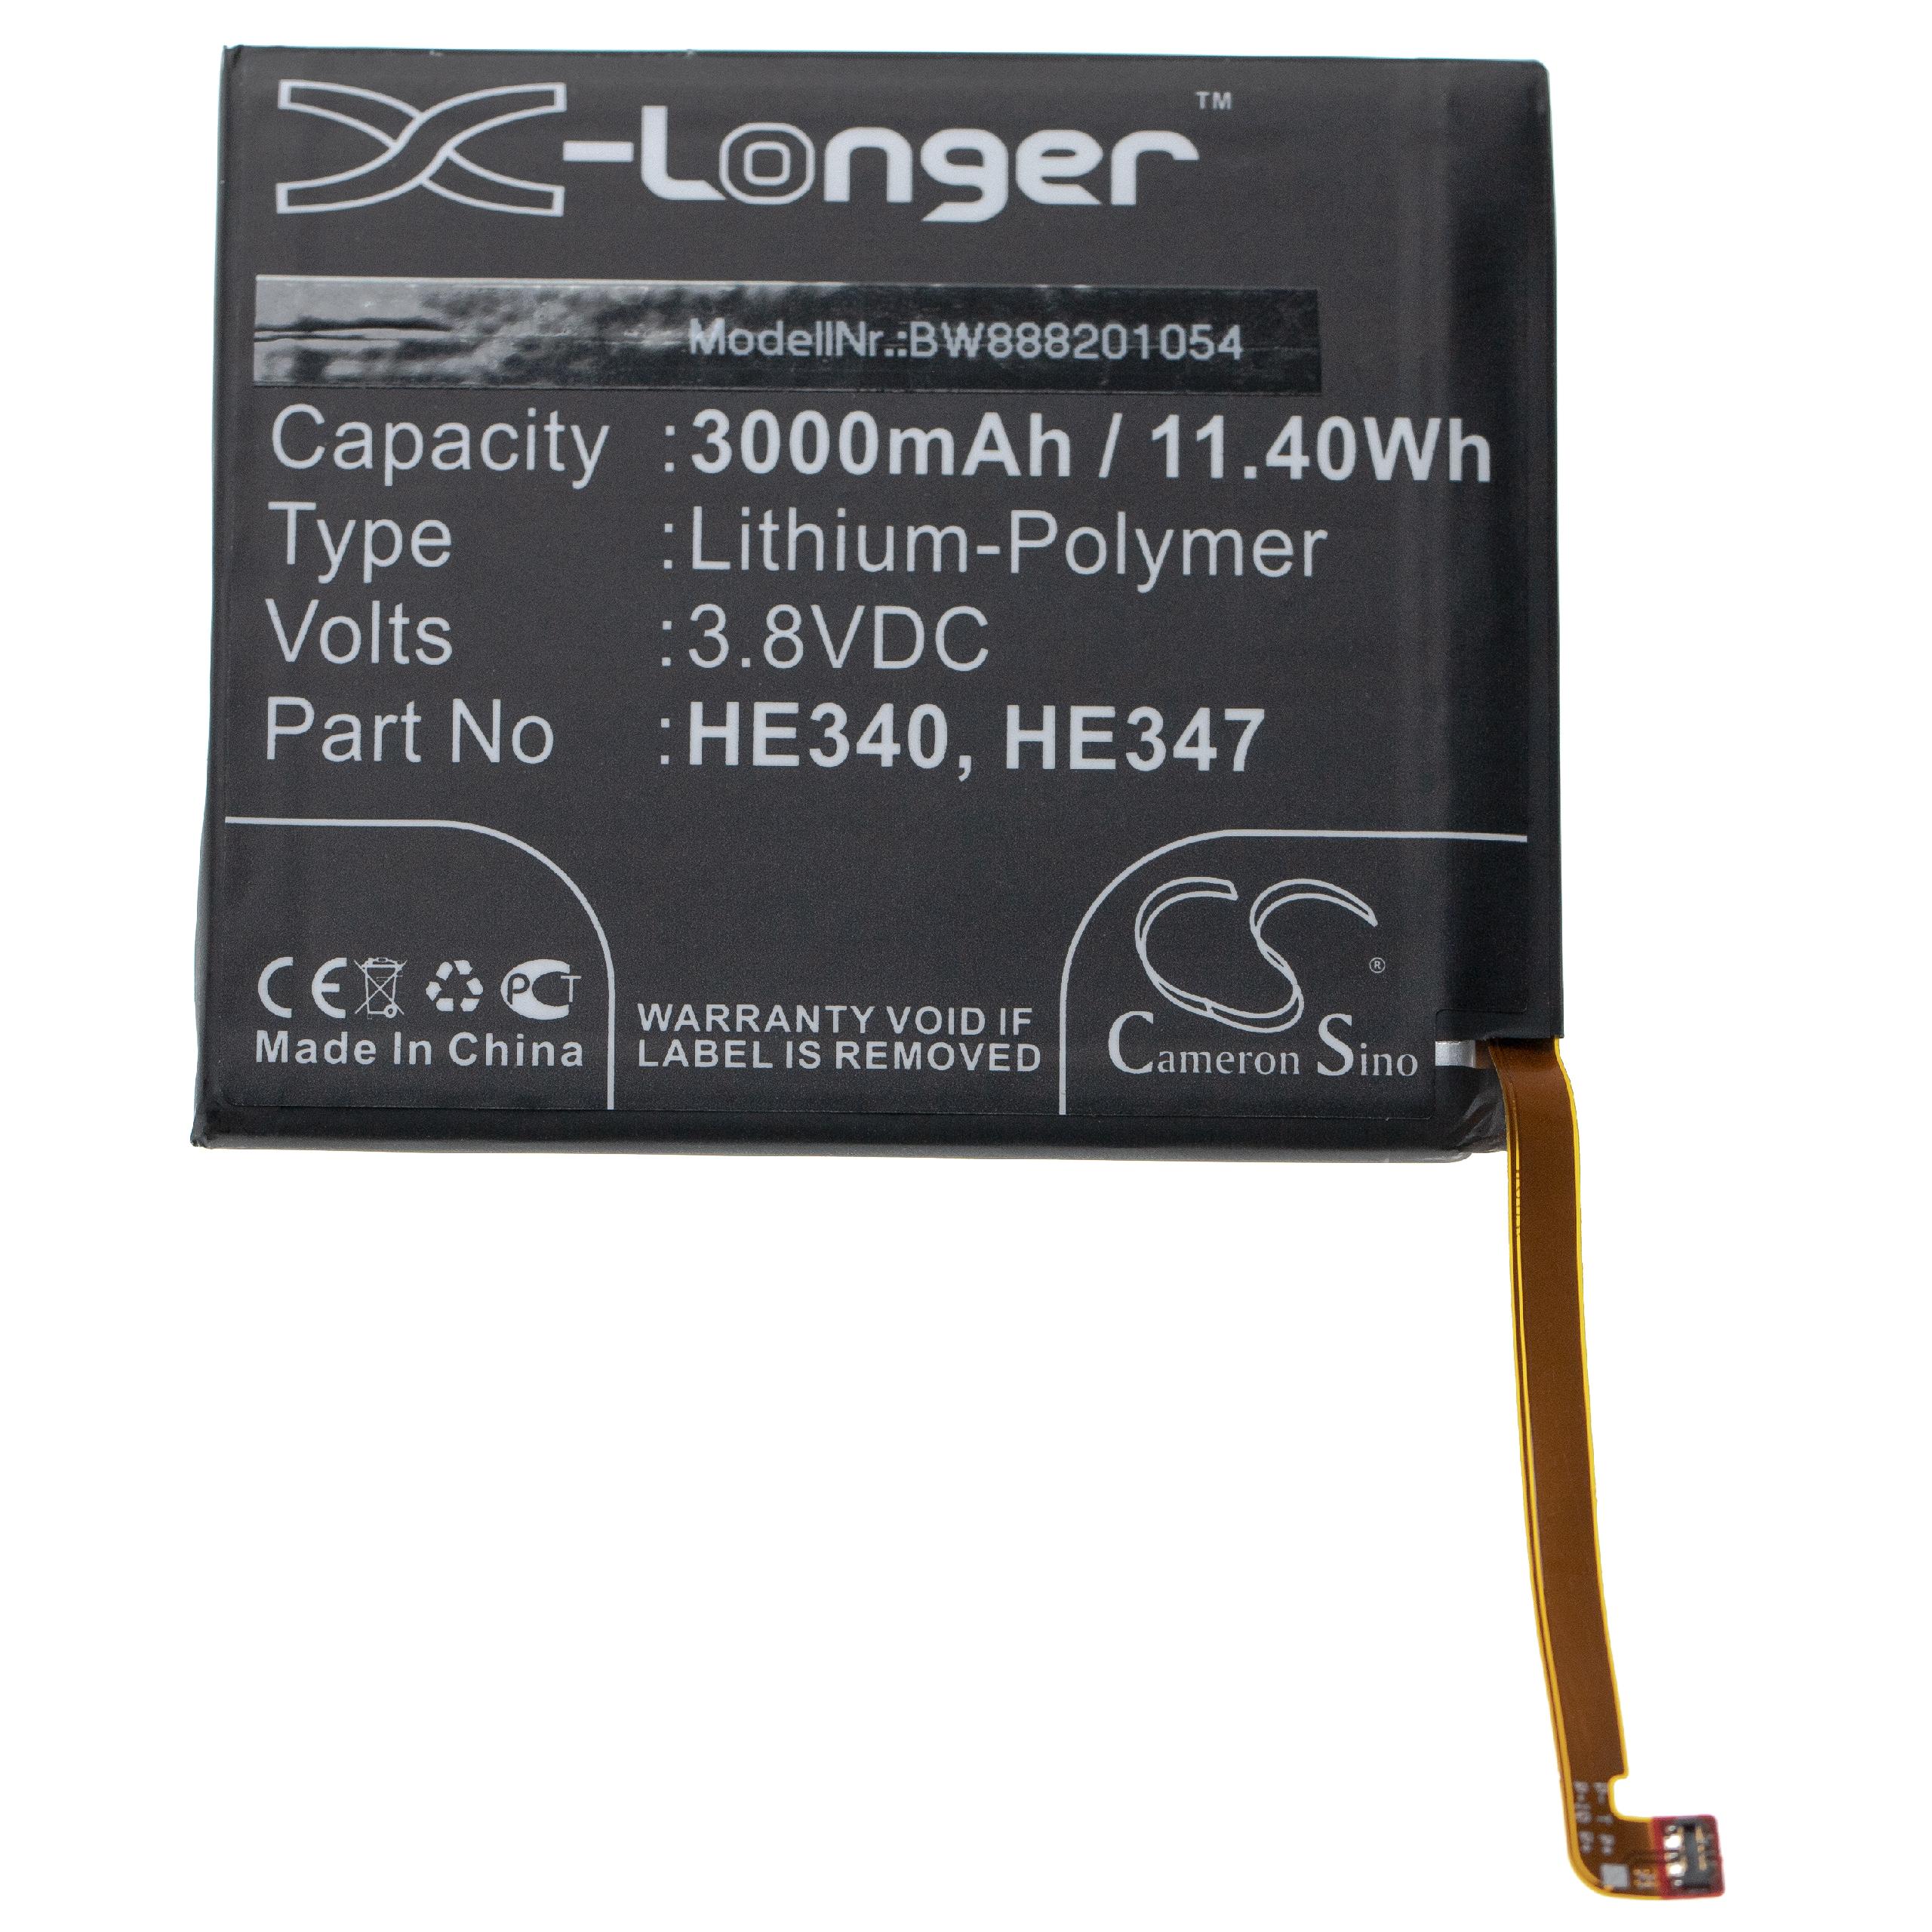 Mobile Phone Battery Replacement for Nokia HE340, HE347 - 3000mAh 3.8V Li-polymer